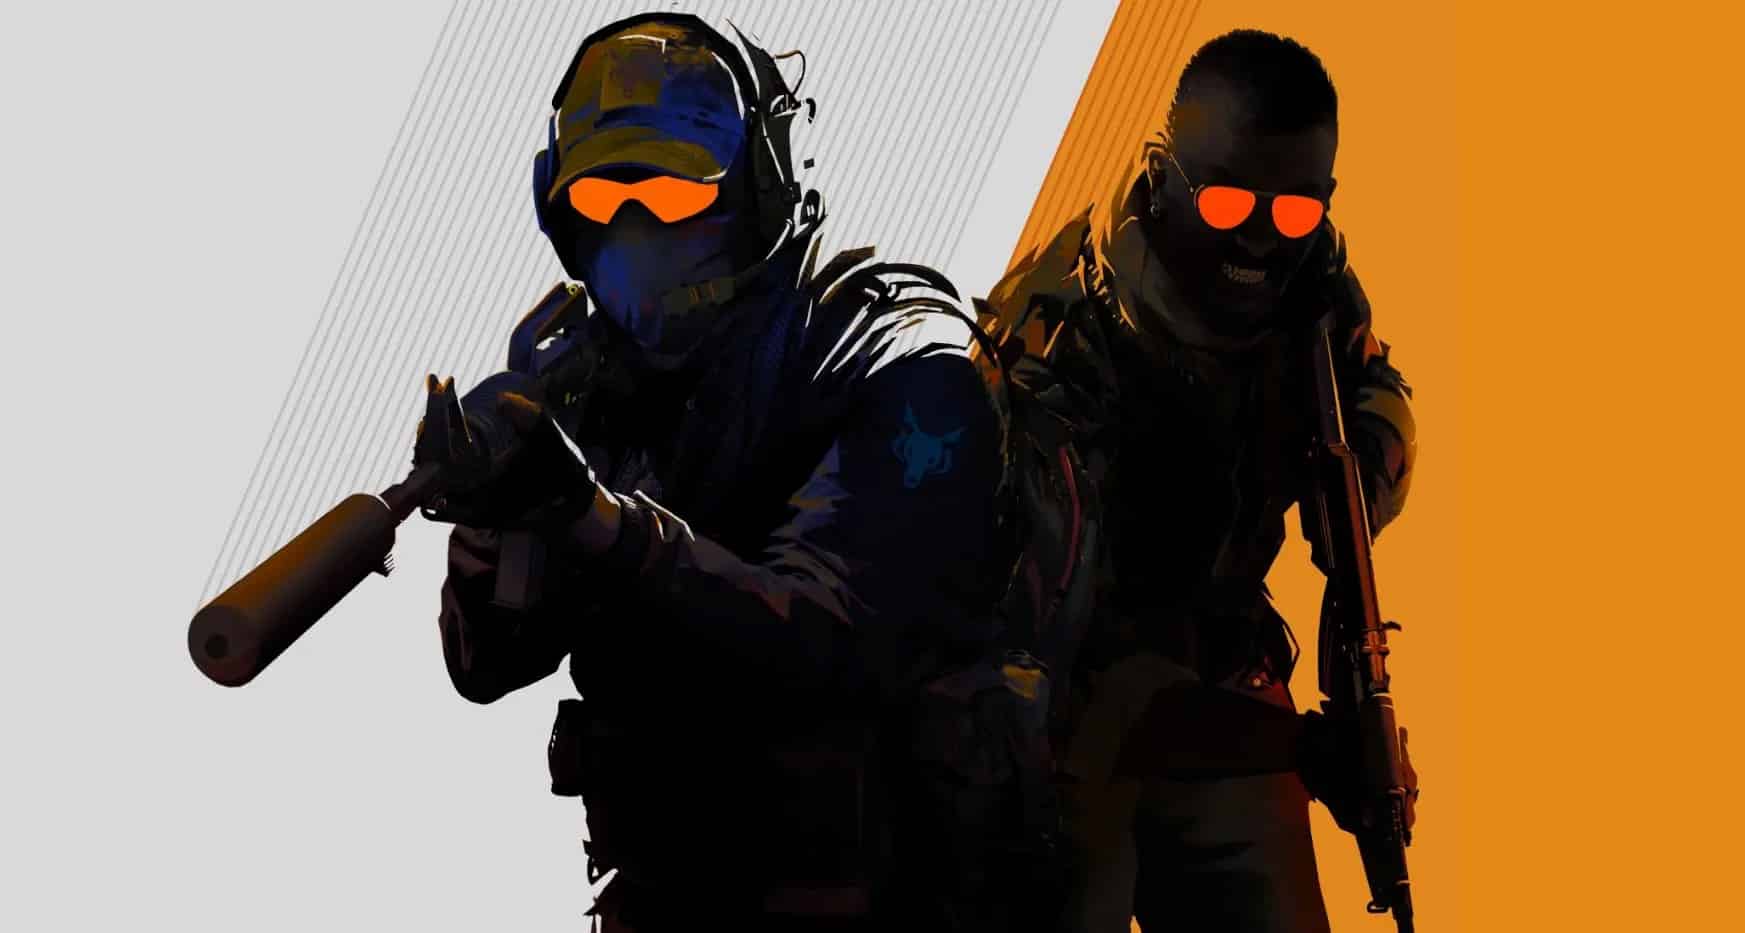 A new Counter-Strike game is reportedly in development and could